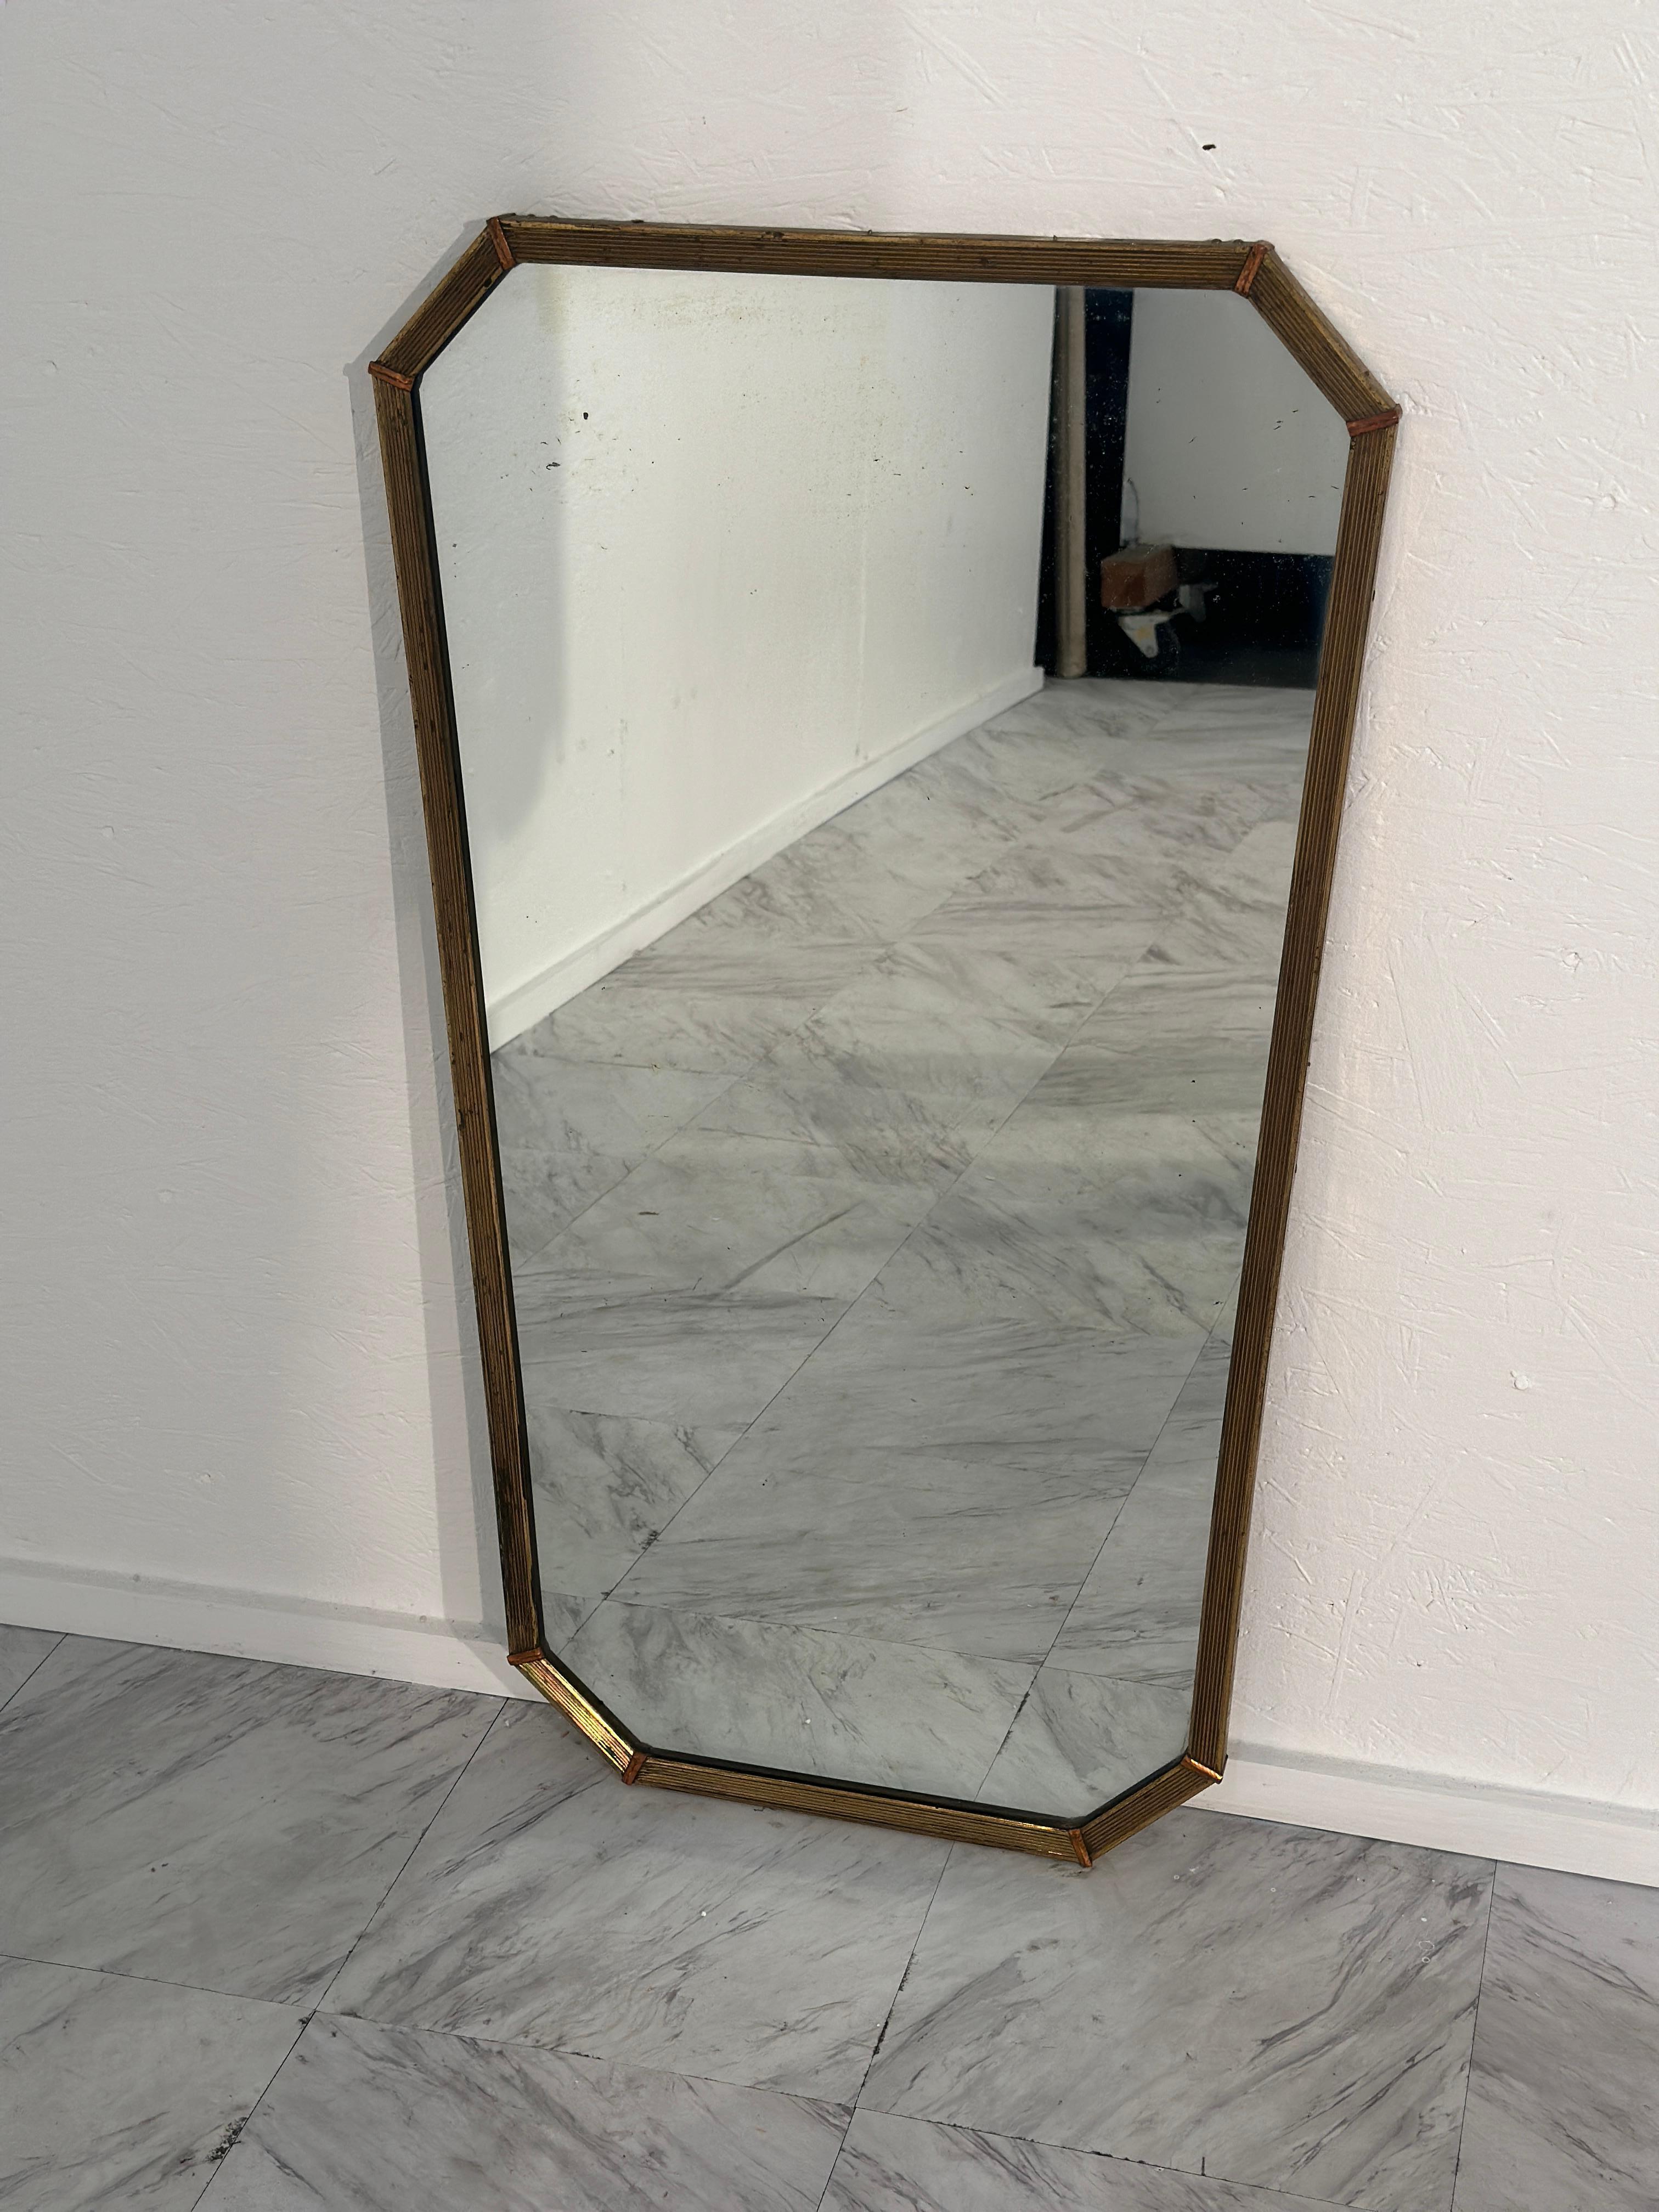 A chic 1970s Vintage Italian Octagonal  Brass Wall Mirror, showcasing sleek lines and timeless elegance in its brass frame, perfect for adding a touch of vintage sophistication to any room.

